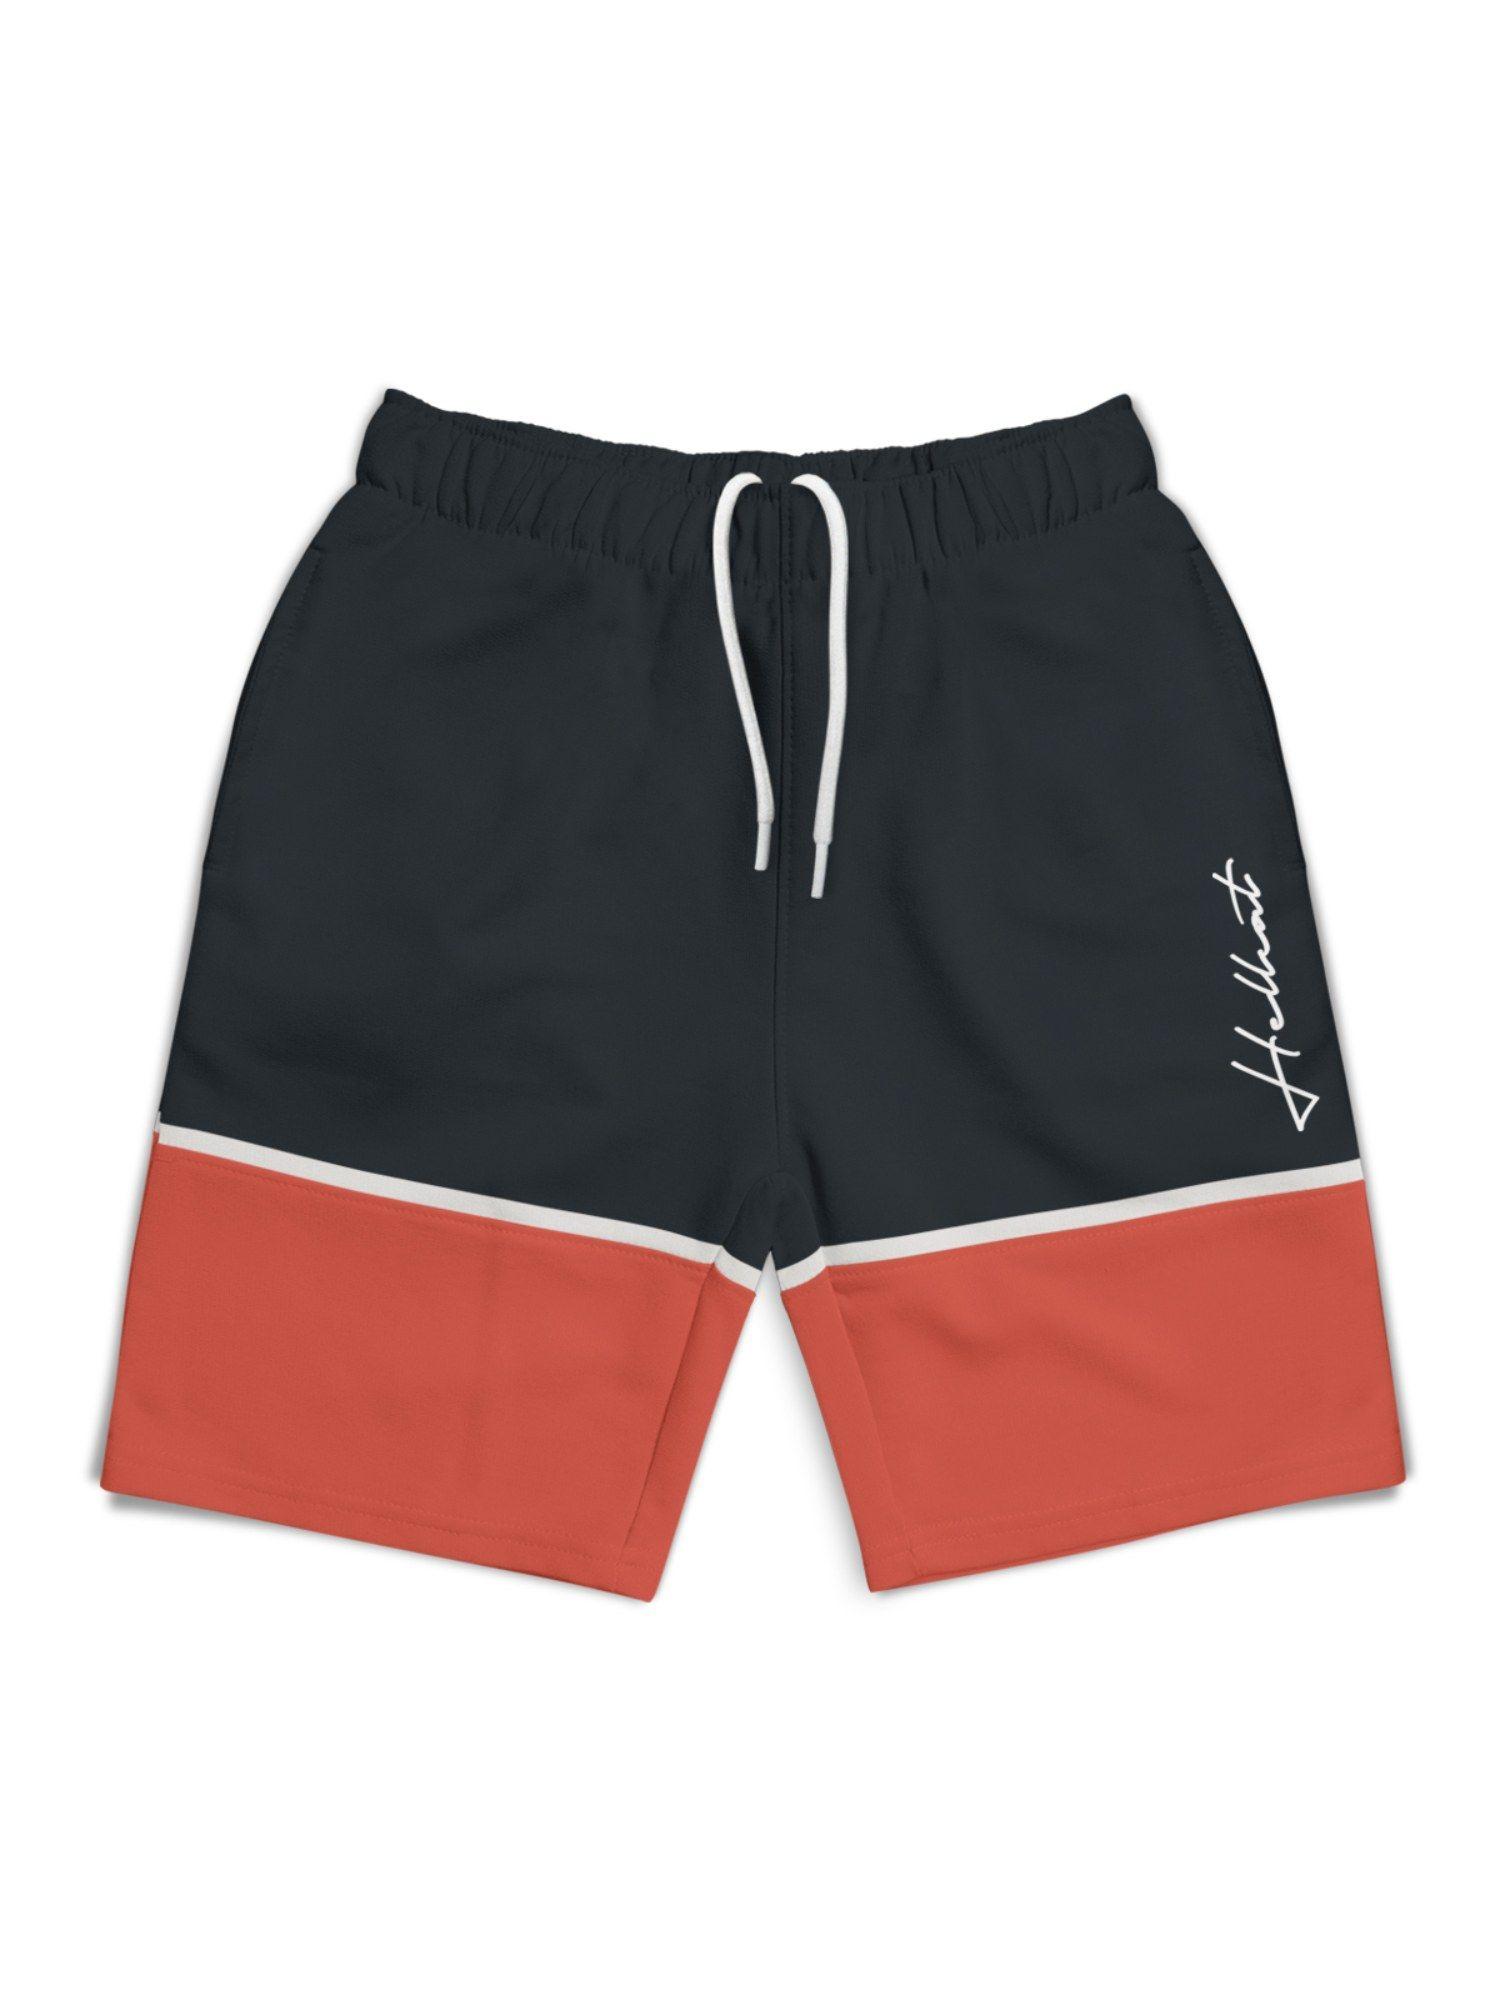 trendy-red-colorblock-with-branding-printed-shorts